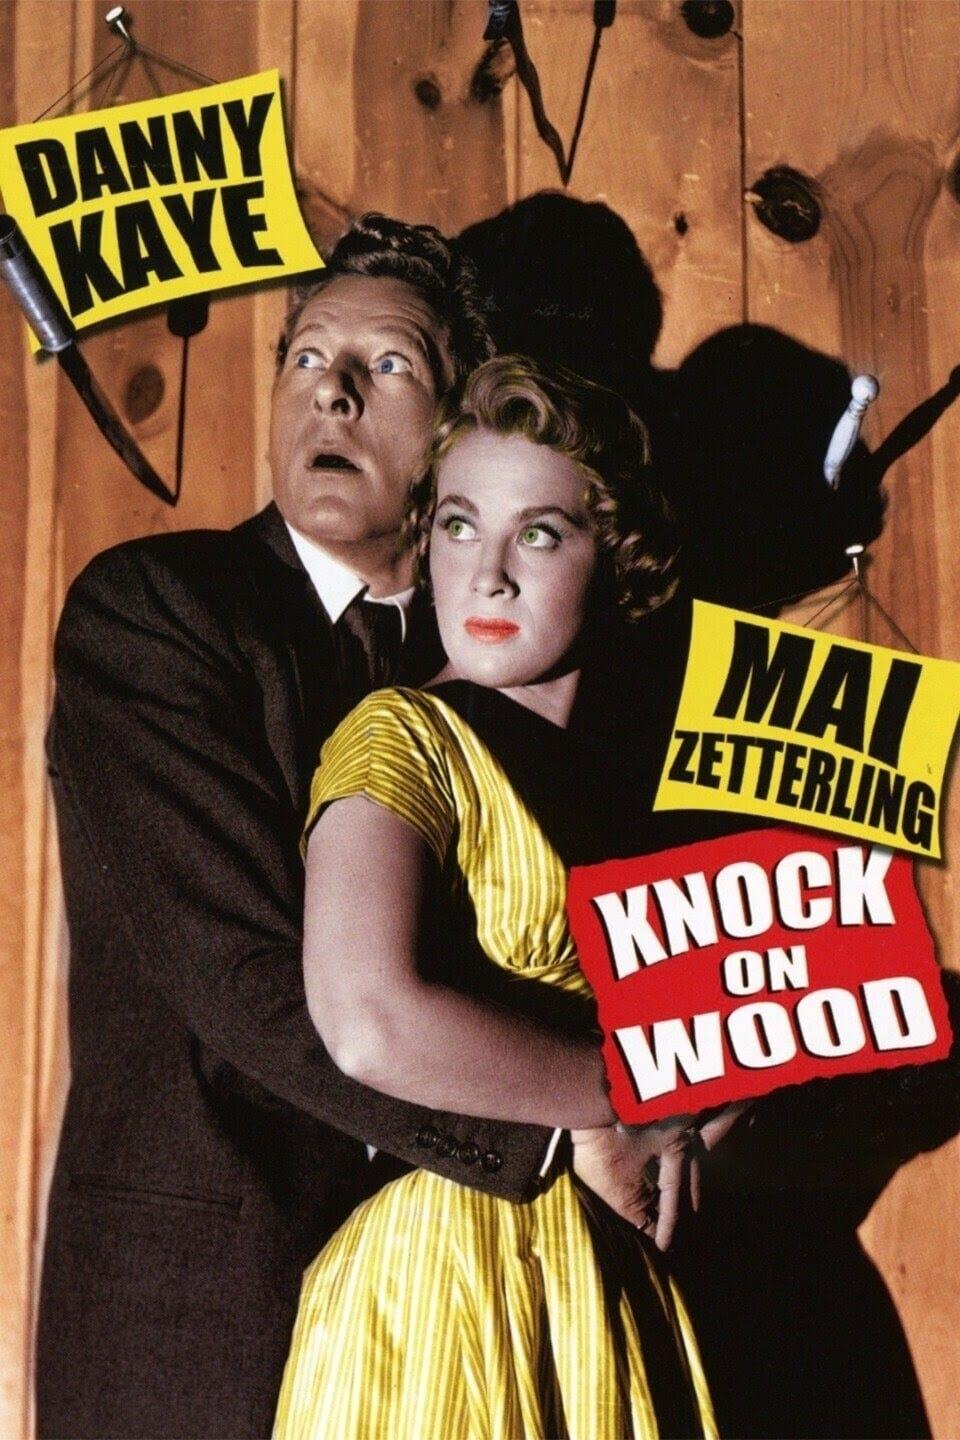 Knock on Wood poster